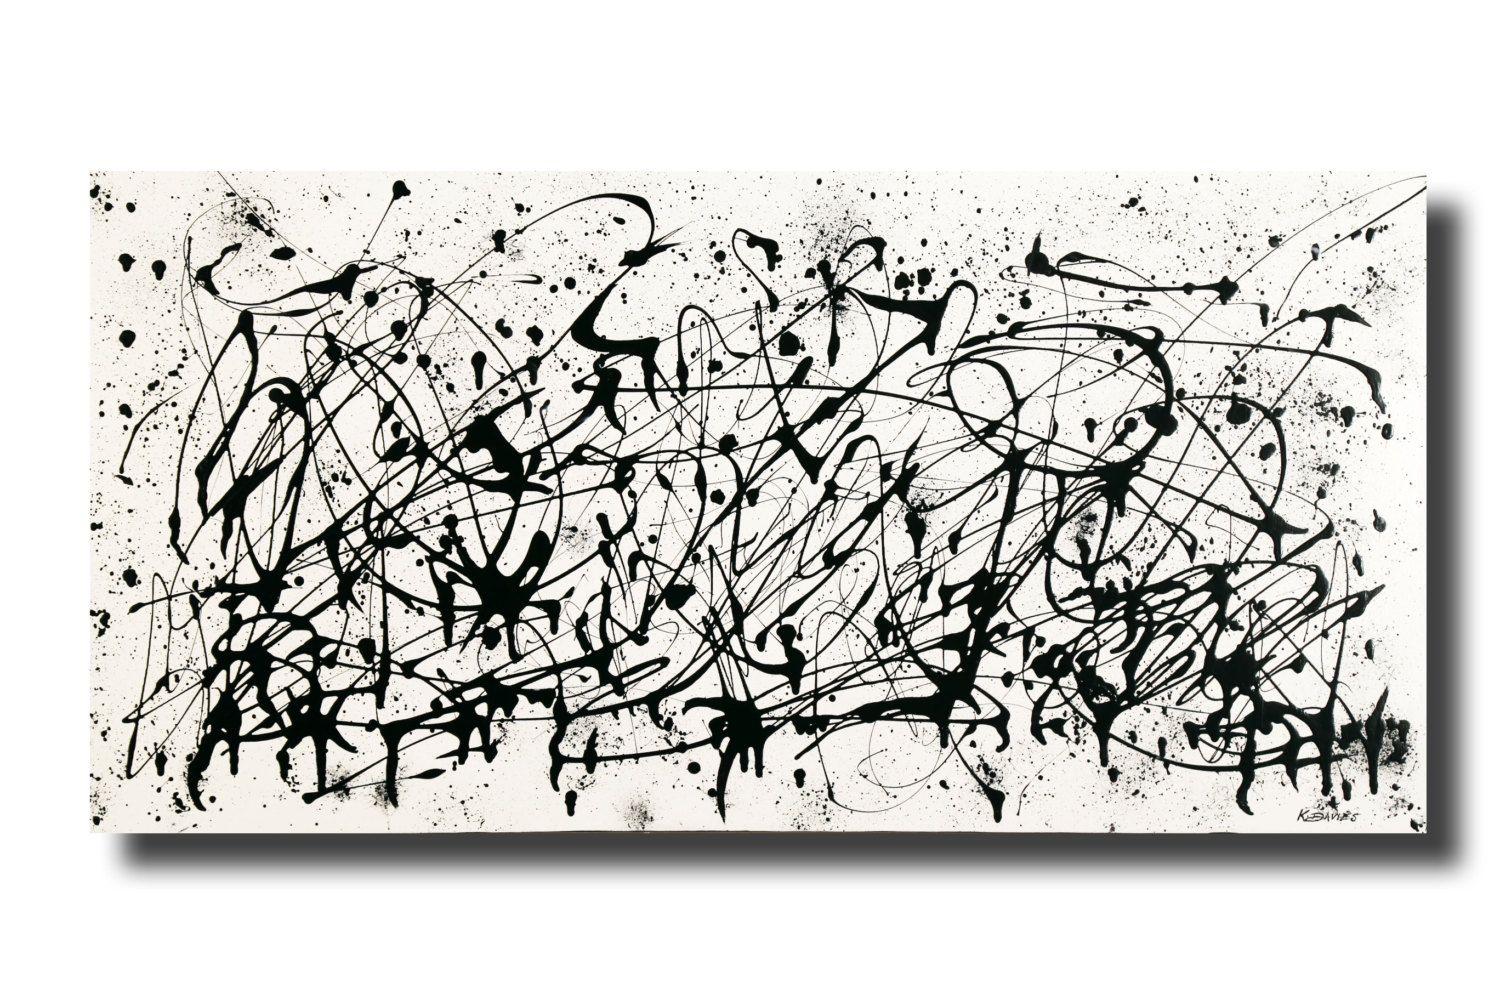 Painting Black and White Logo - Large contemporary black white Abstract painting 24x48 acrylic